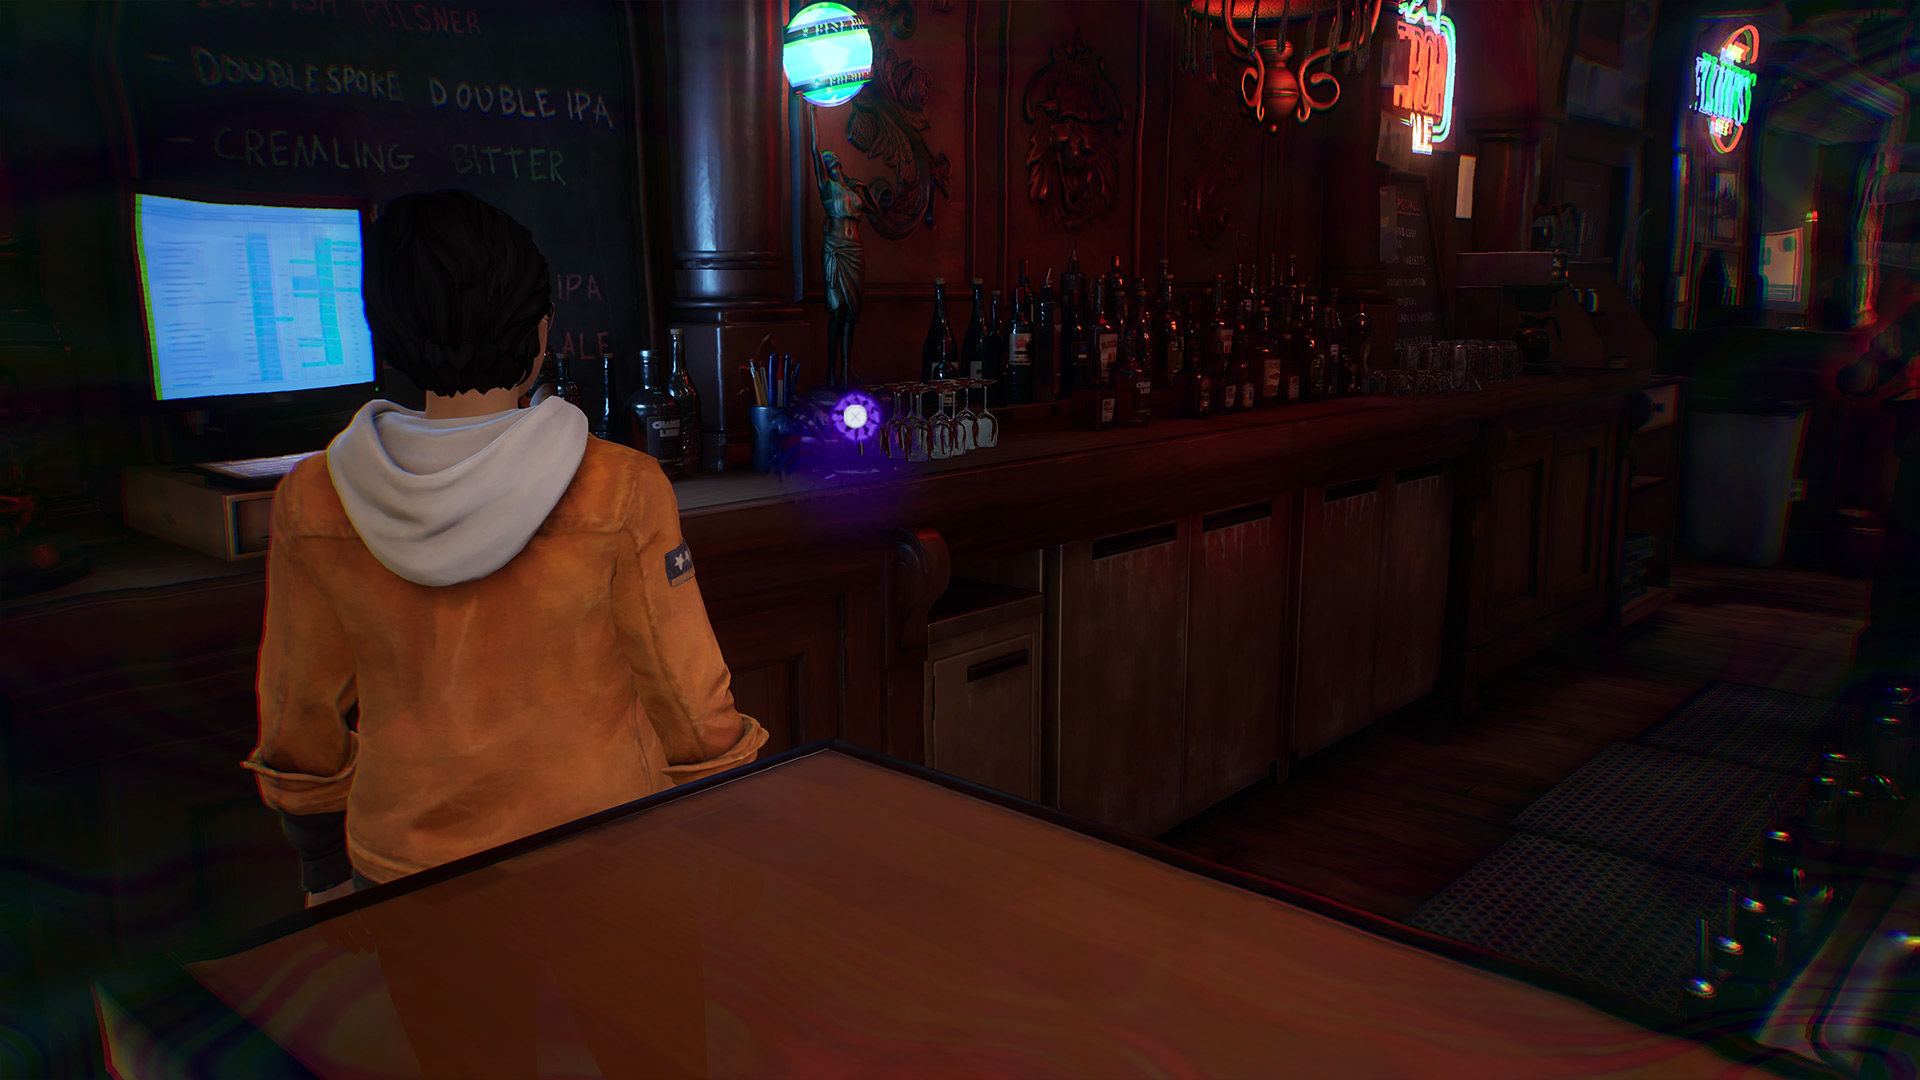 Life is Strange True Colors memory locations: Alex looking at bottles at the back of a bar.